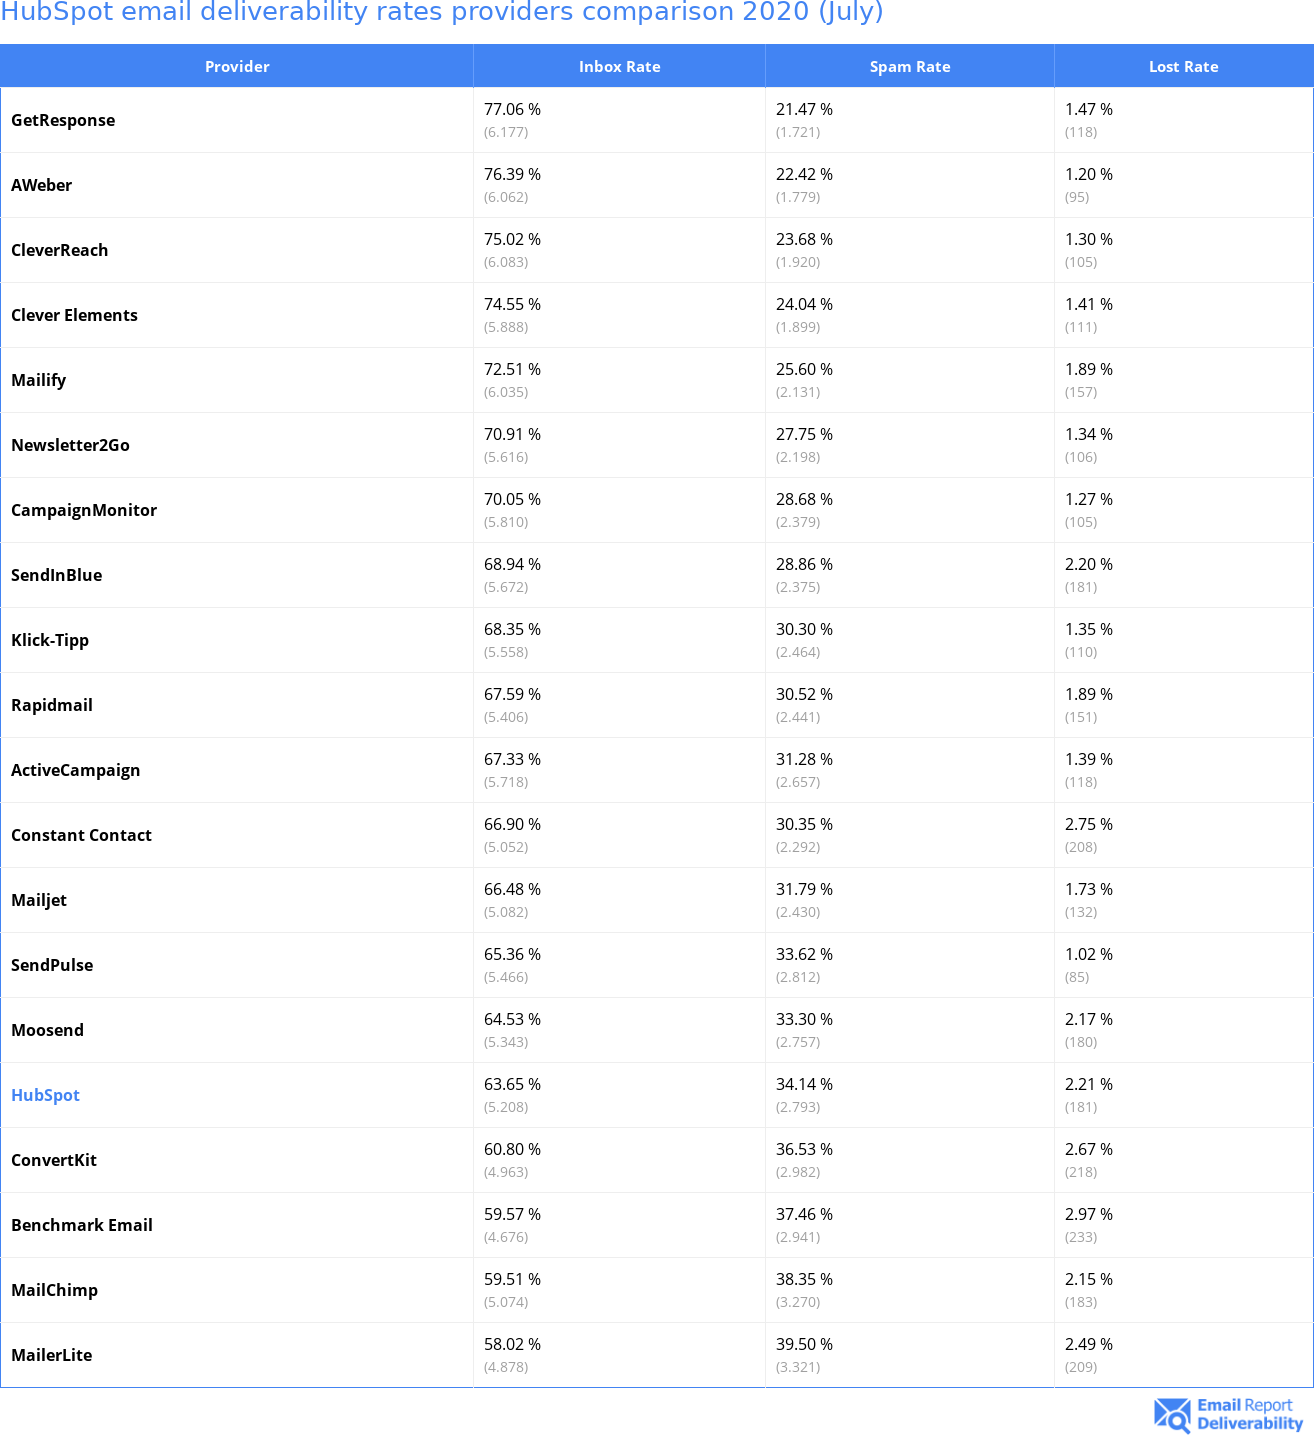 HubSpot email deliverability rates providers comparison 2020 (July)